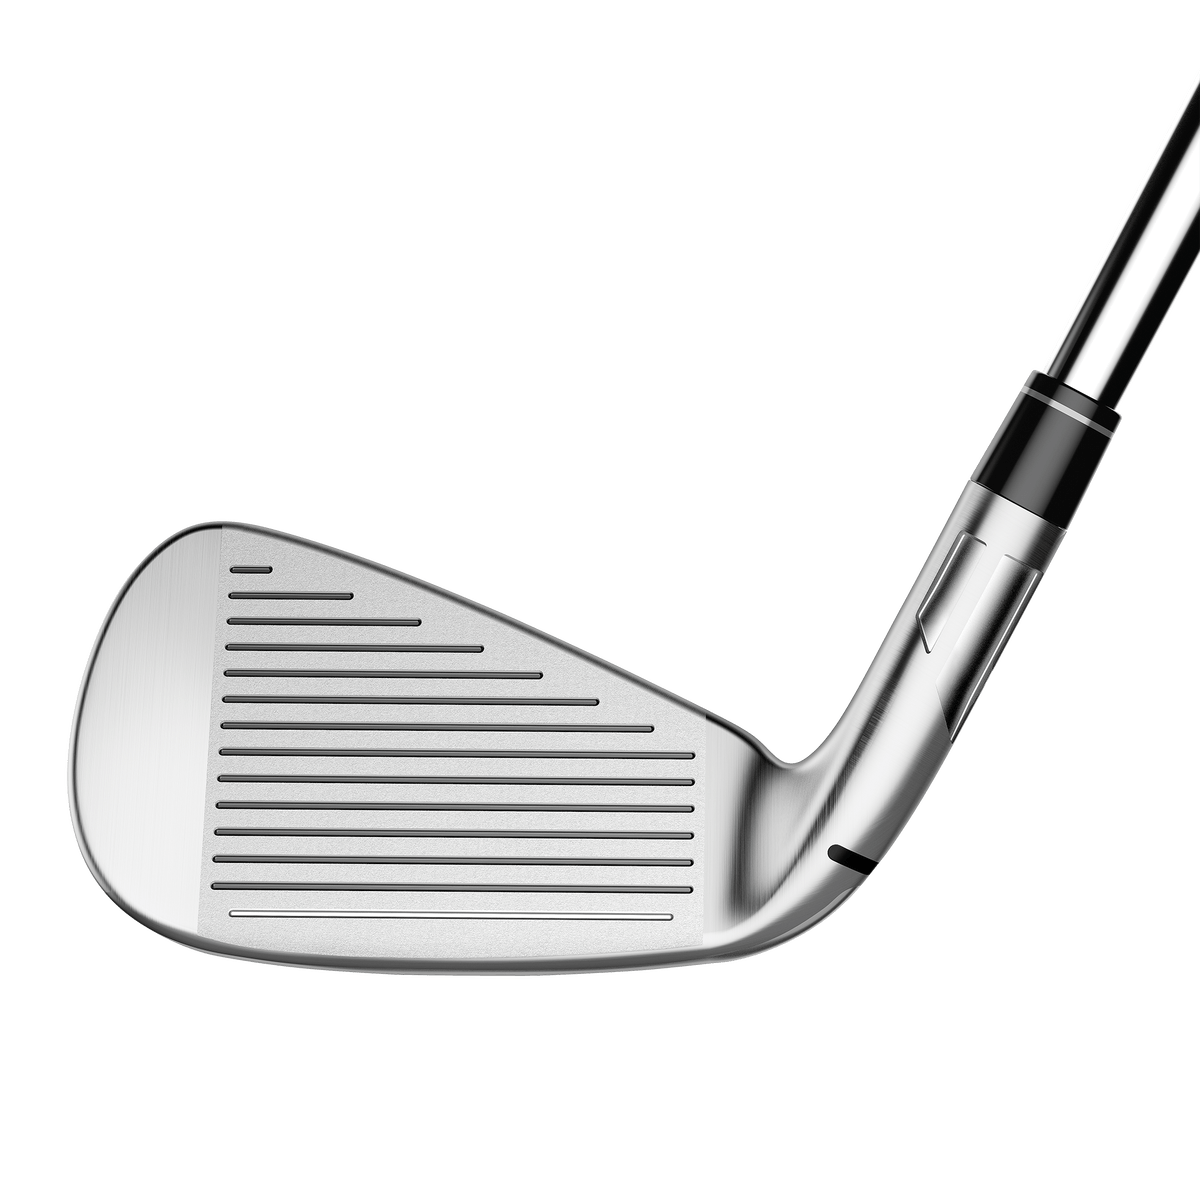 TaylorMade SIM2 Max Irons · Right handed · Steel · Stiff · 5-PW,AW